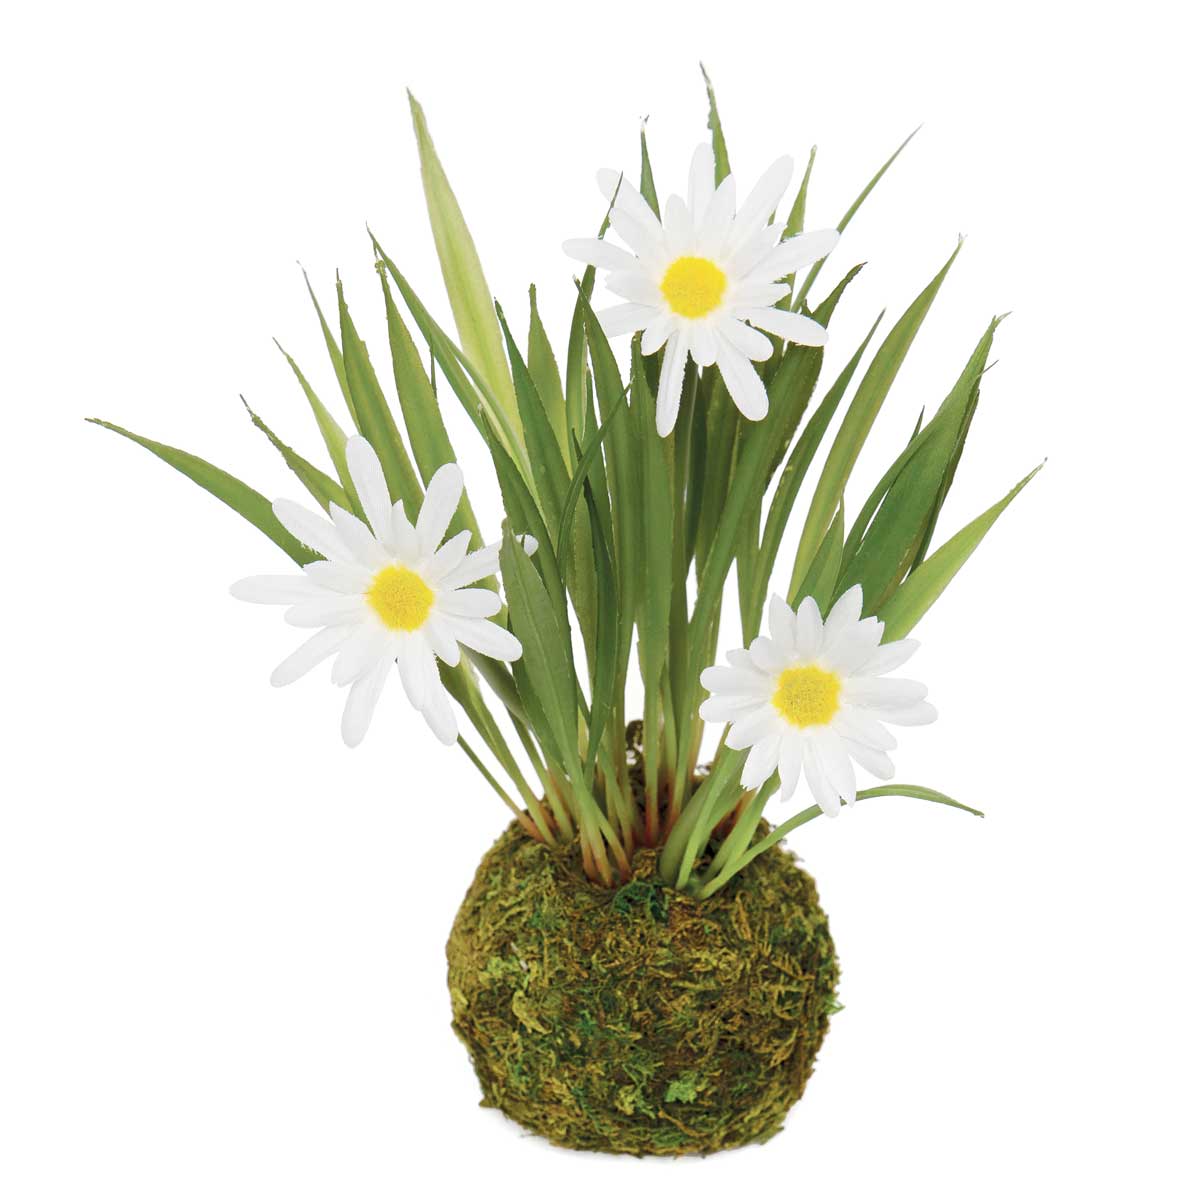 MINI DAISY X3 AND GRASS WITH FAUX DIRT/MOSS 6"x8" WHITE